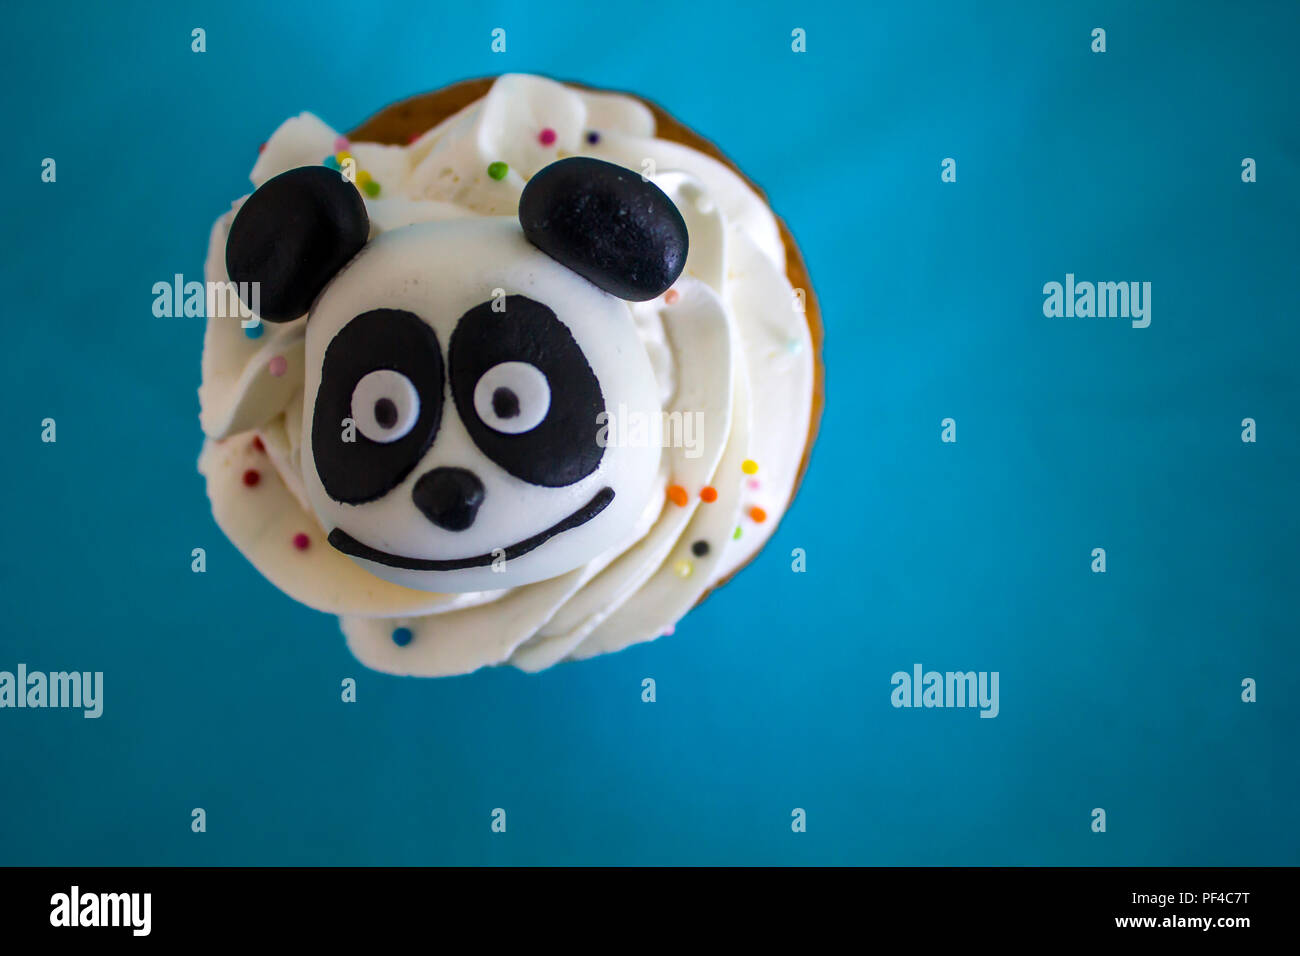 Top view of a cupcake decorated with a panda Stock Photo